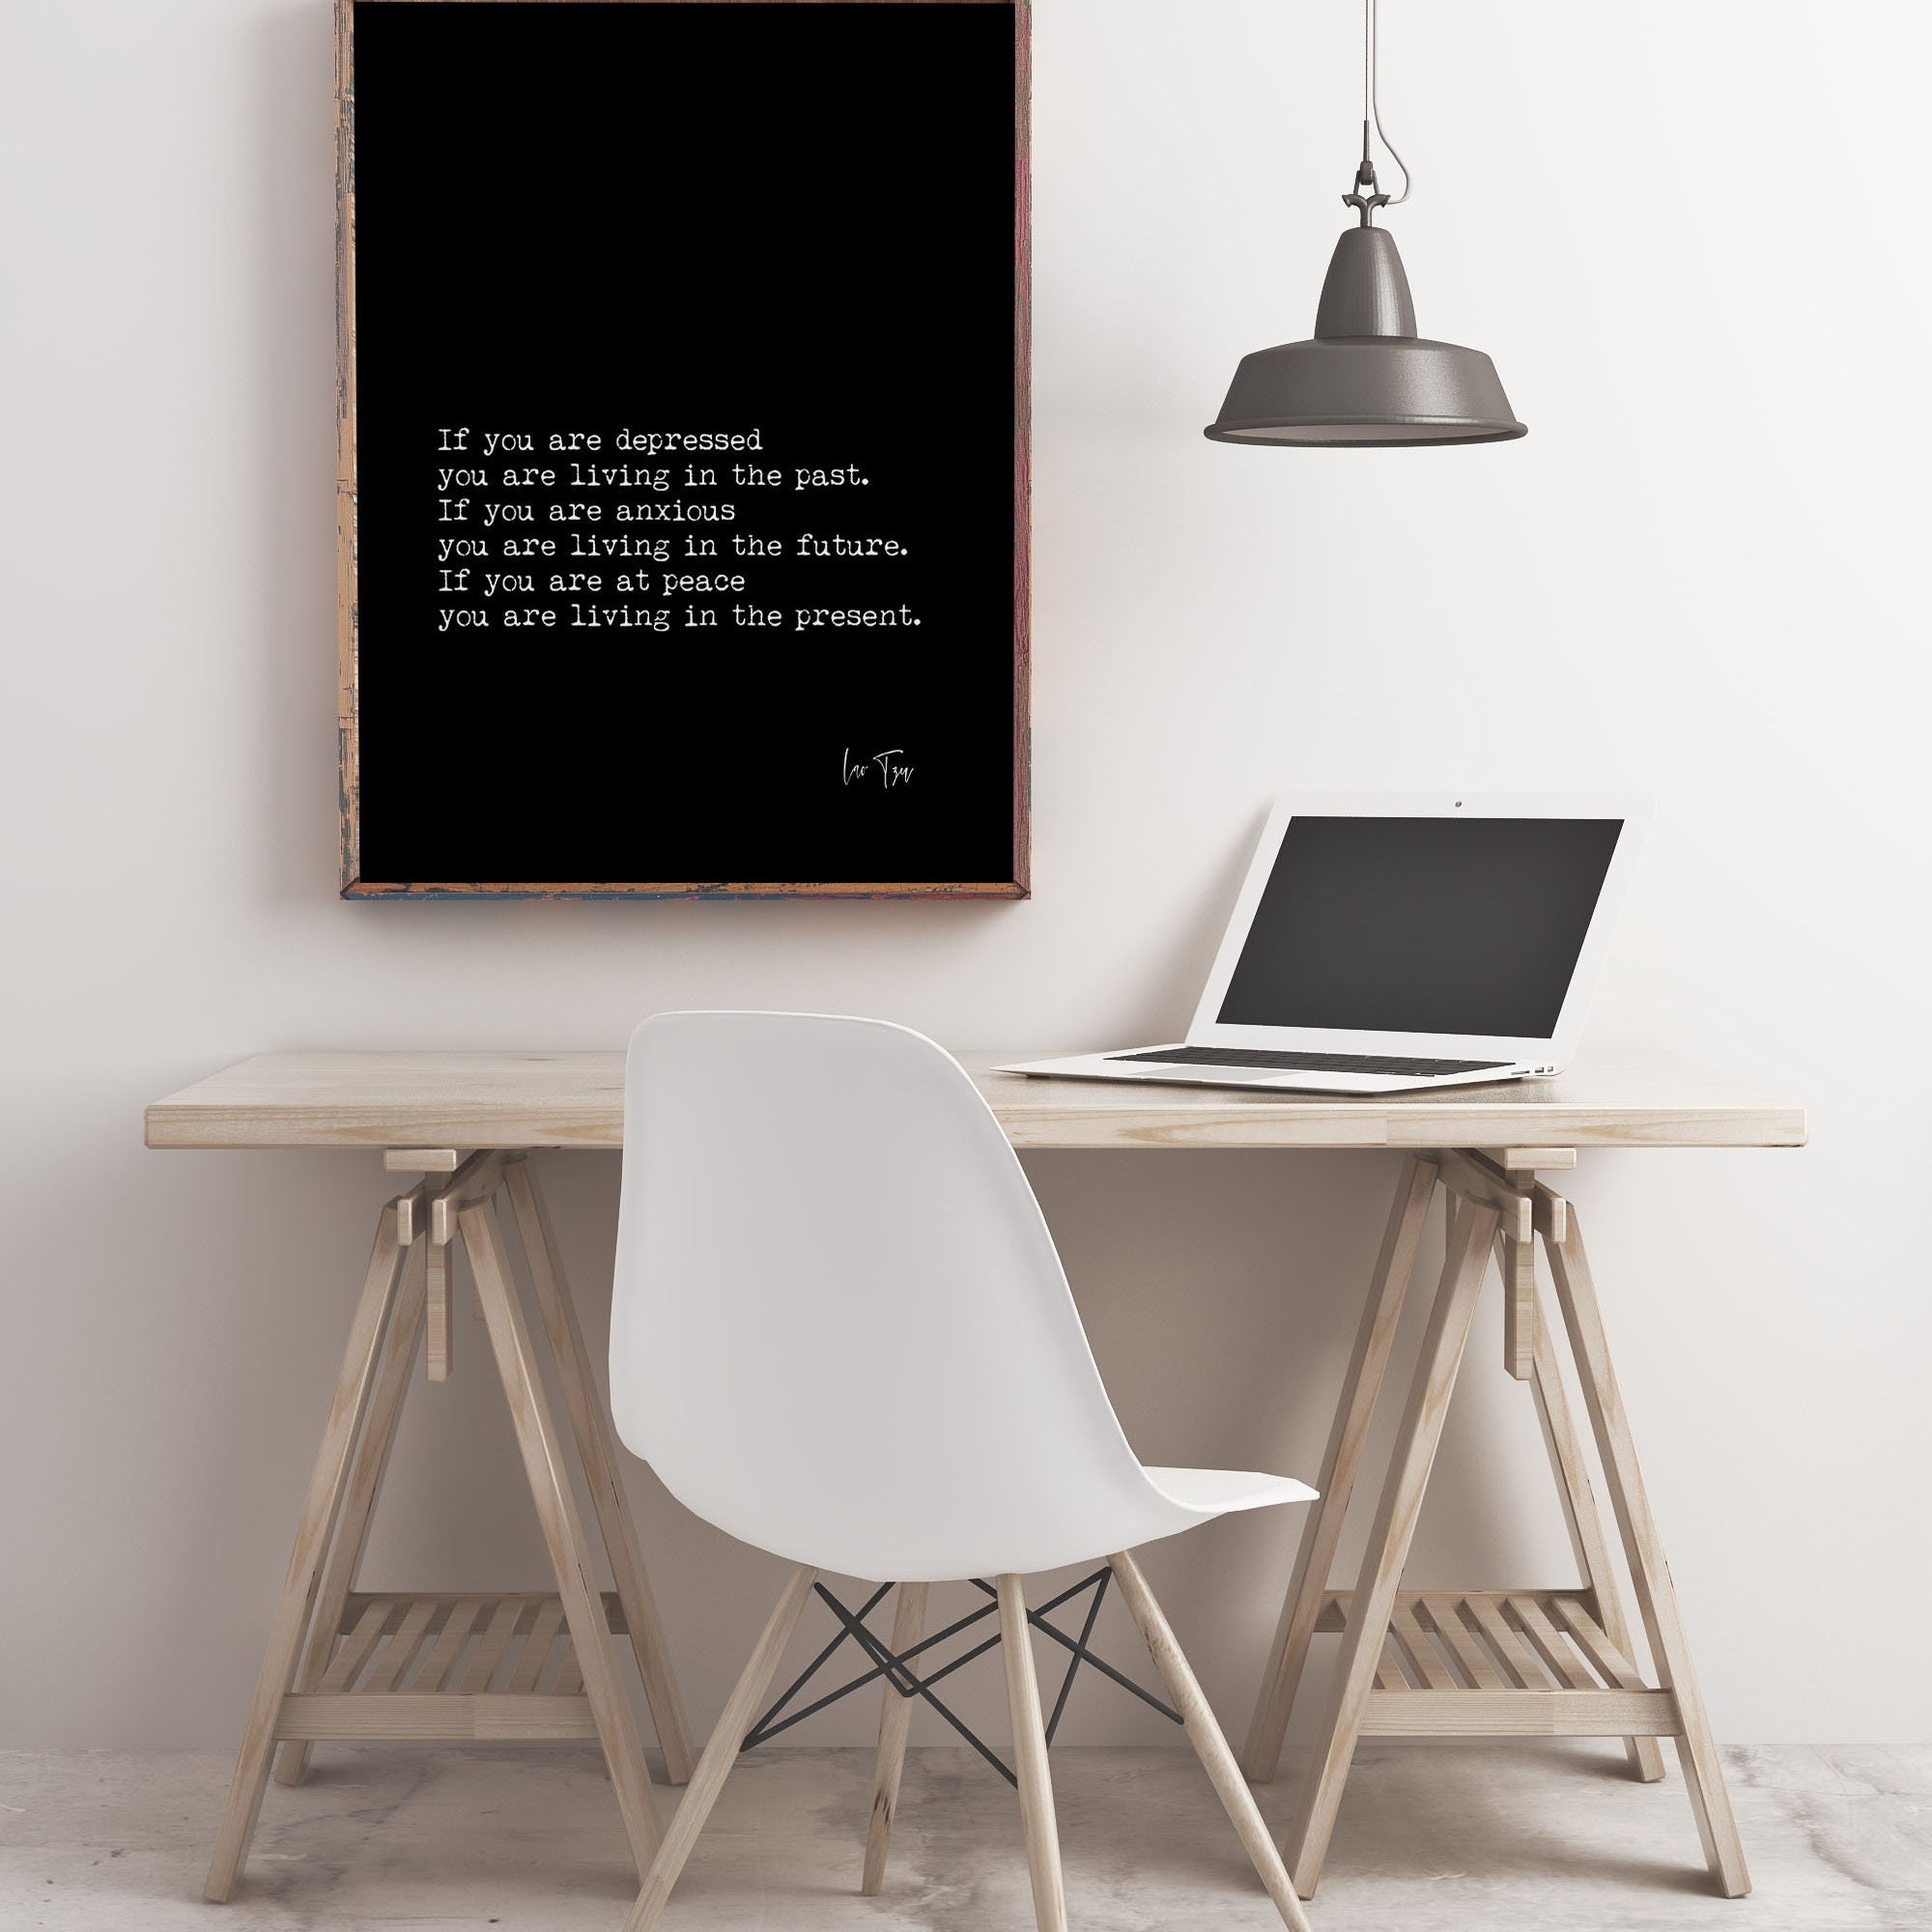 Lao Tzu Peace Wall Art Prints in Black and White - If You Are At Peace You Are Living In The Present - Unframed or Framed Art